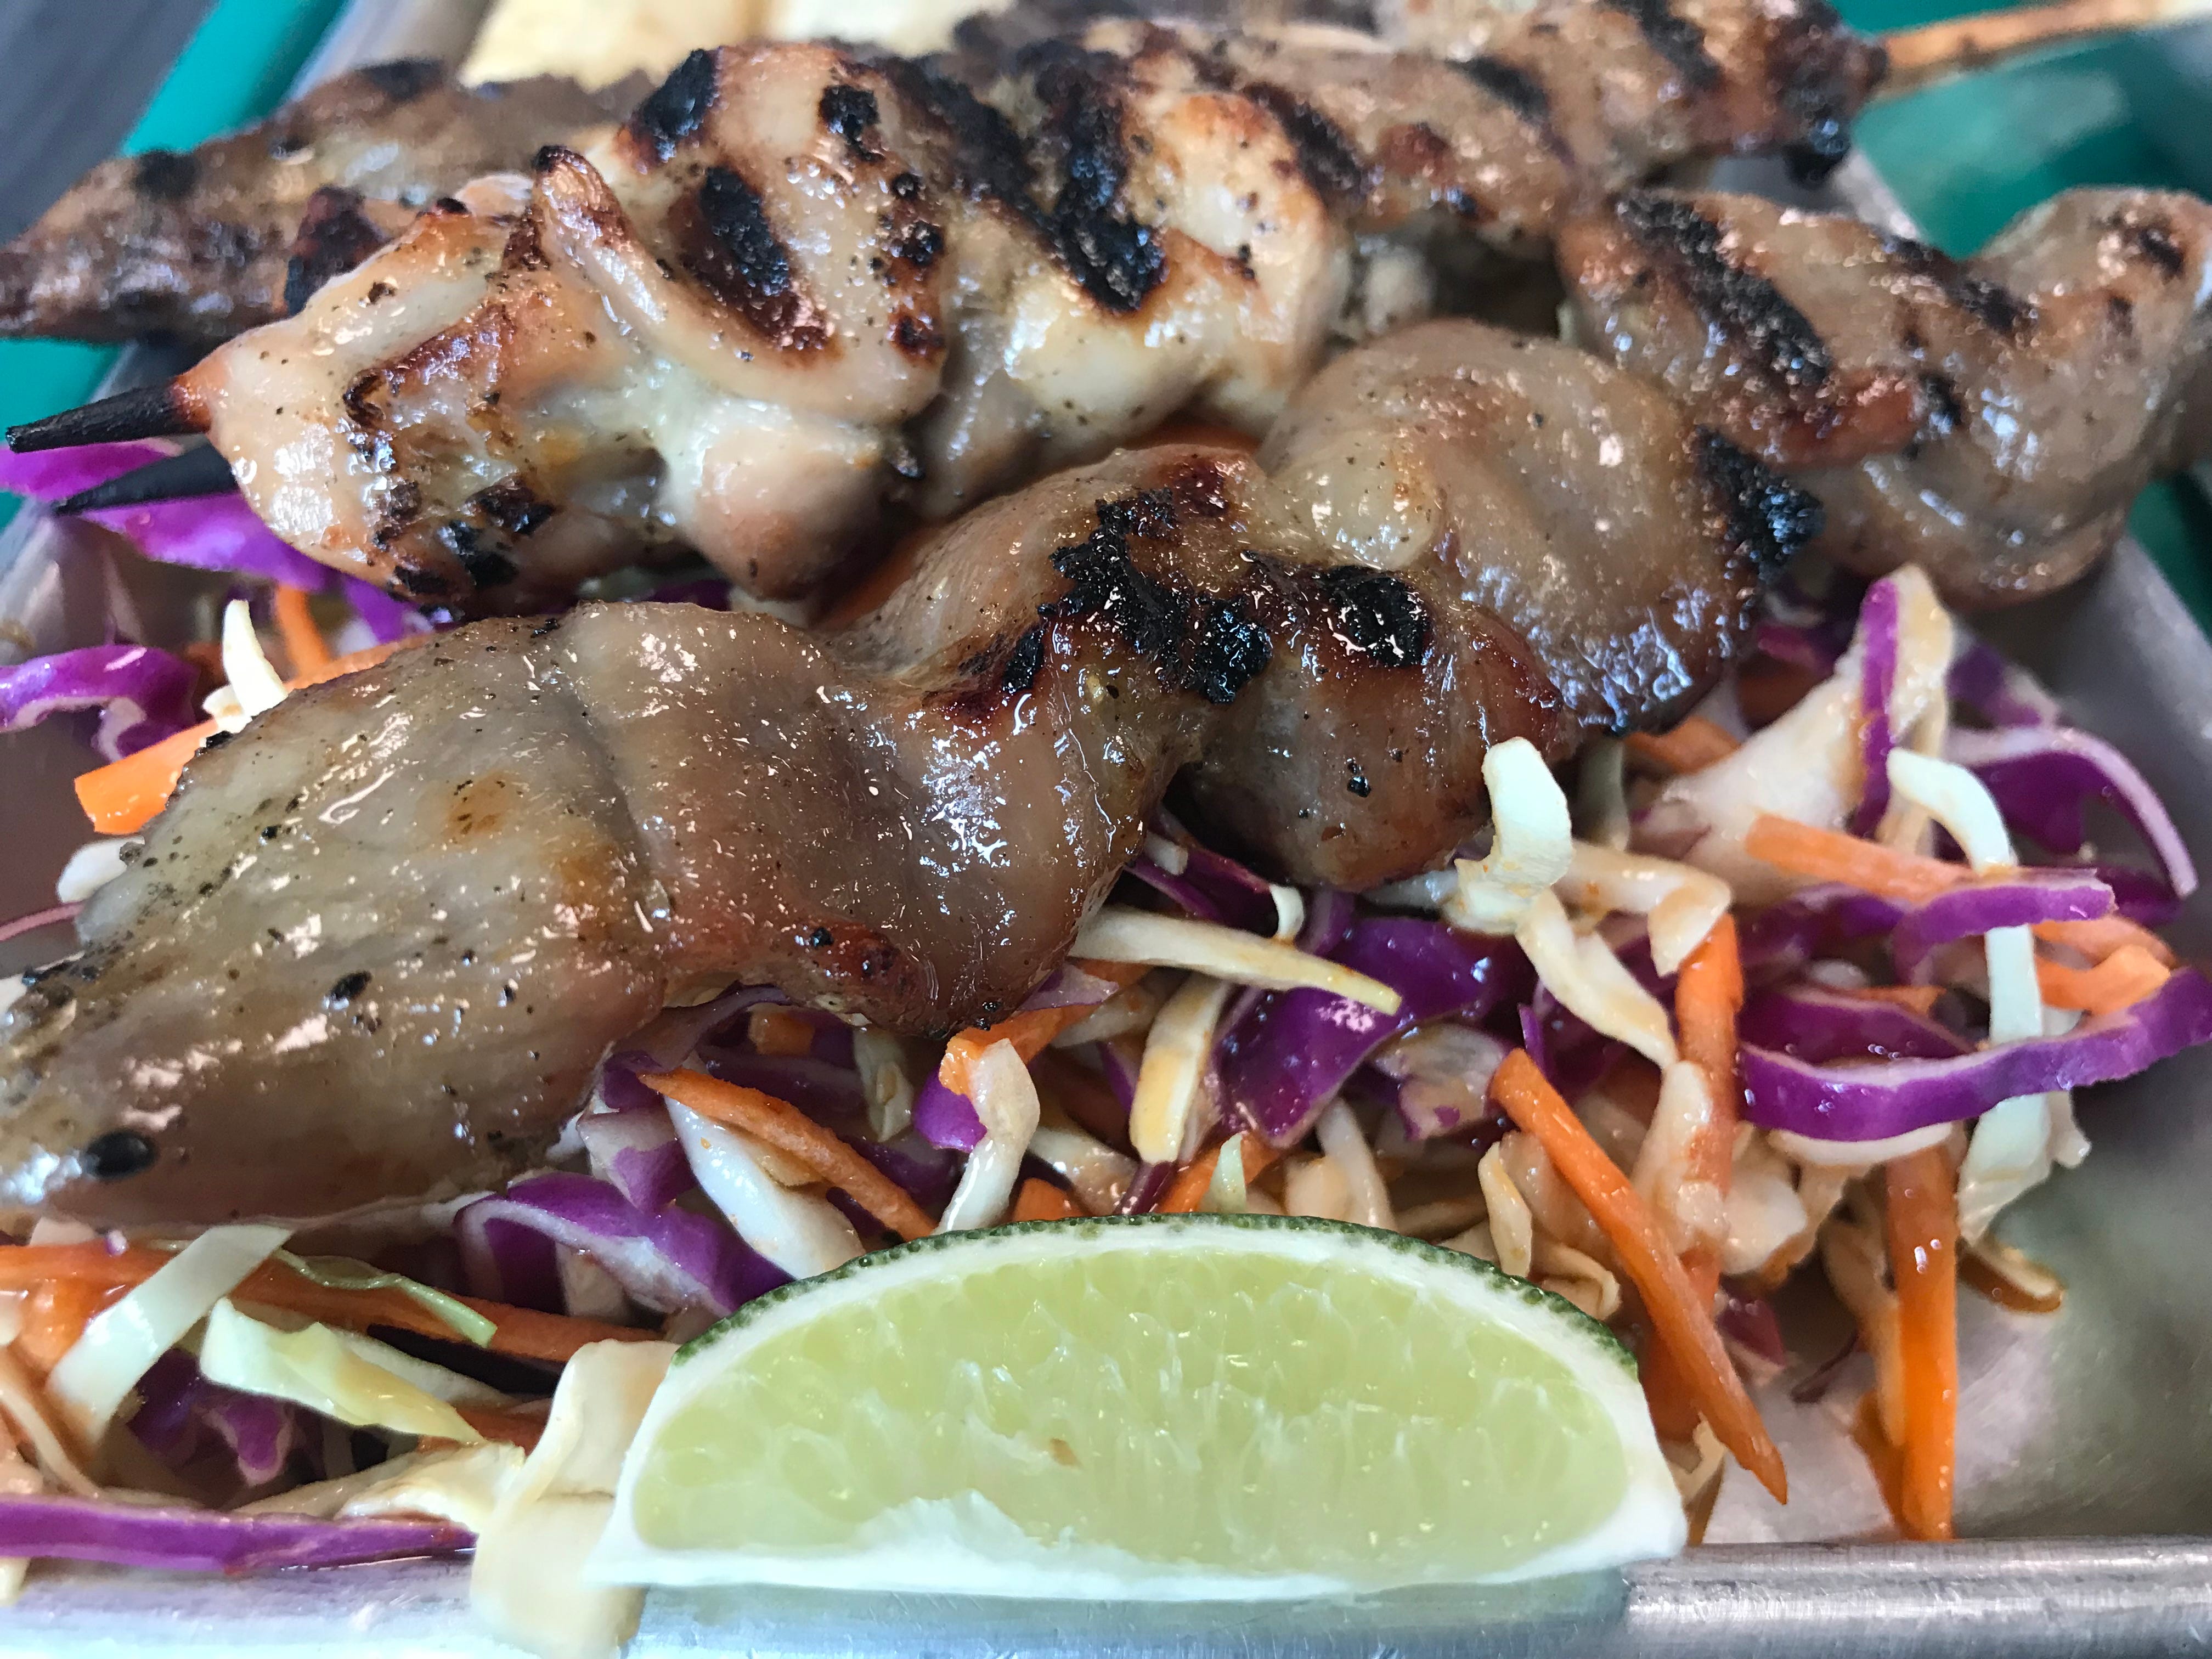 Flavor-drenched grilled meat skewers are just some of the offerings at Meat on the Street, a Filipino-food stand at 1125 N. Ninth St., a few blocks west of Fiserv Forum.